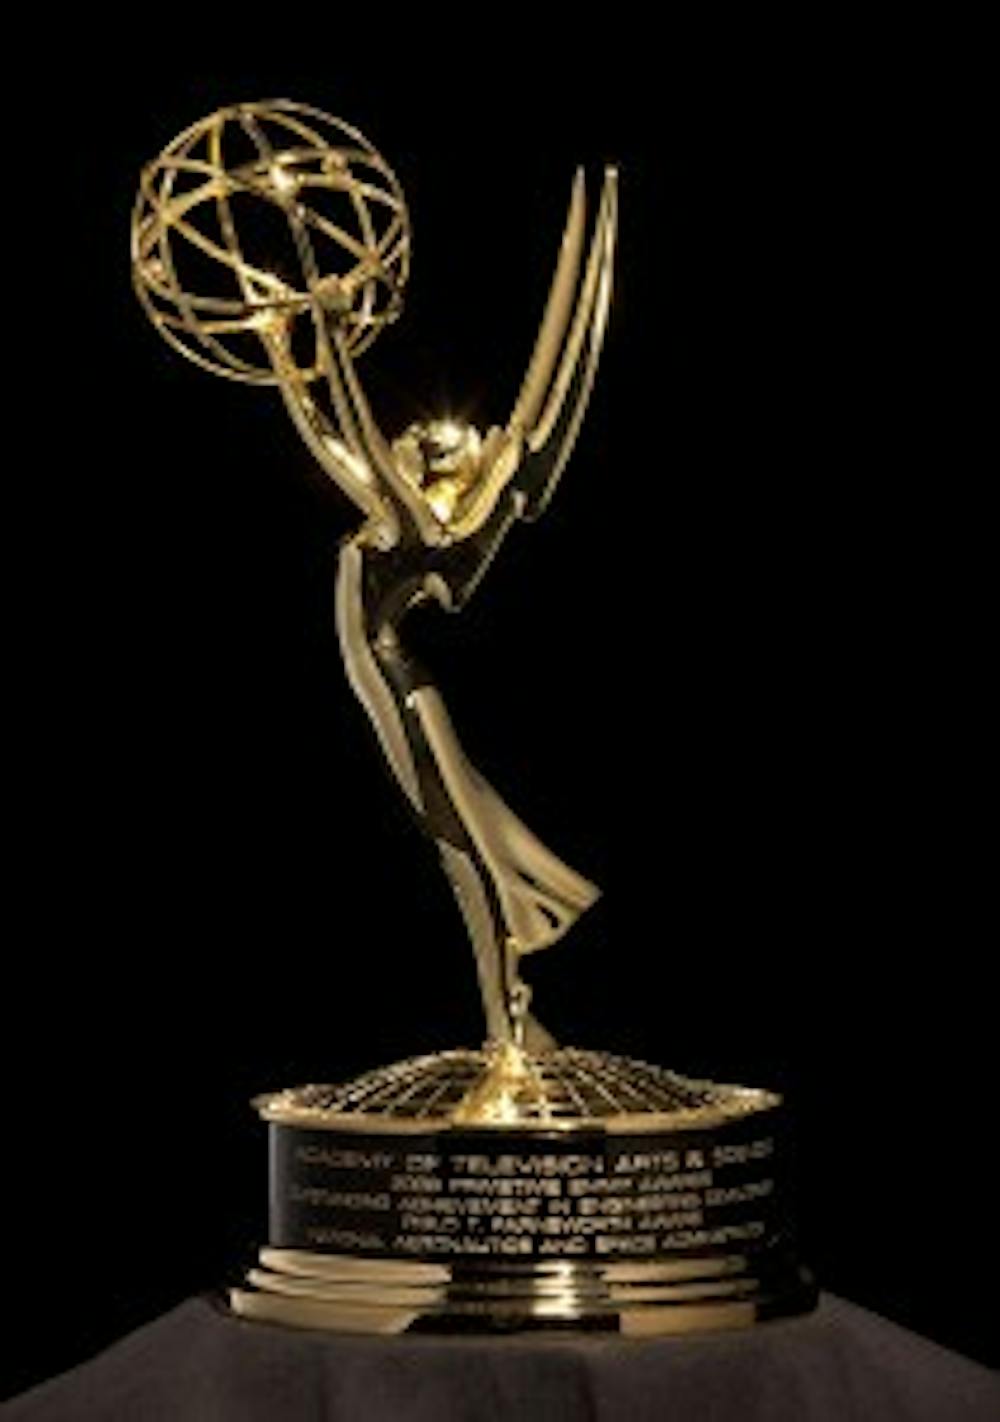 The 2009 Philo T. Farnsworth Primetime Emmy Award Statue given to NASA Television in recognition for engineering excellence and technological innovations that made possible the first live TV broadcast from the moon by the Apollo 11 is shown on Aug. 19, 2009 at NASA Headquarters in Washington.  Photo Credit: (NASA/Bill Ingalls)